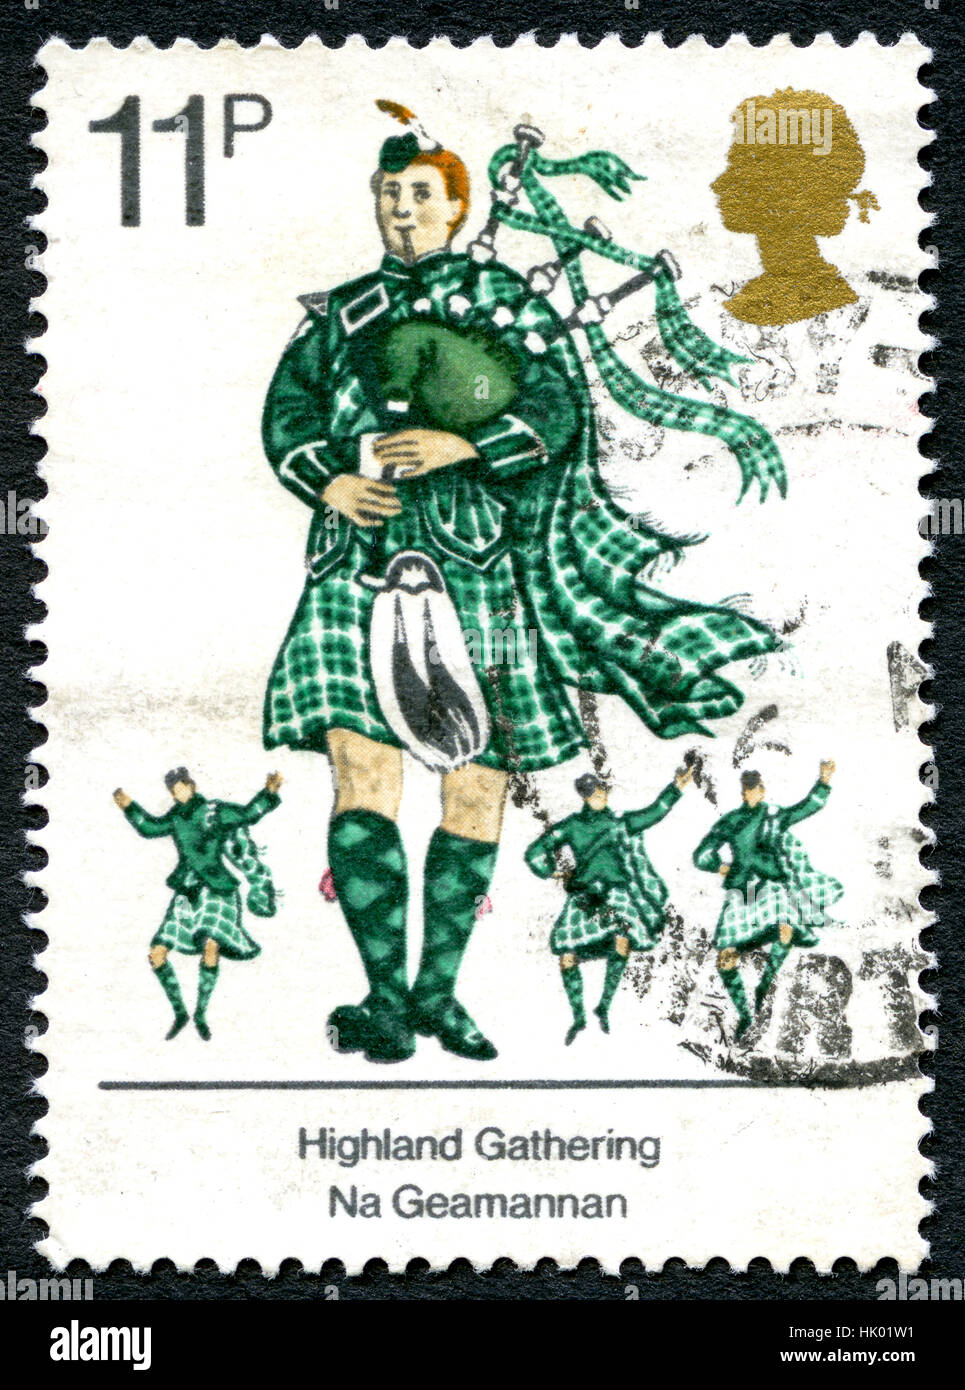 GREAT BRITAIN - CIRCA 1980s: A used postage stamp from the UK, celebrating the Highland Gathering, circa 1980s. Stock Photo